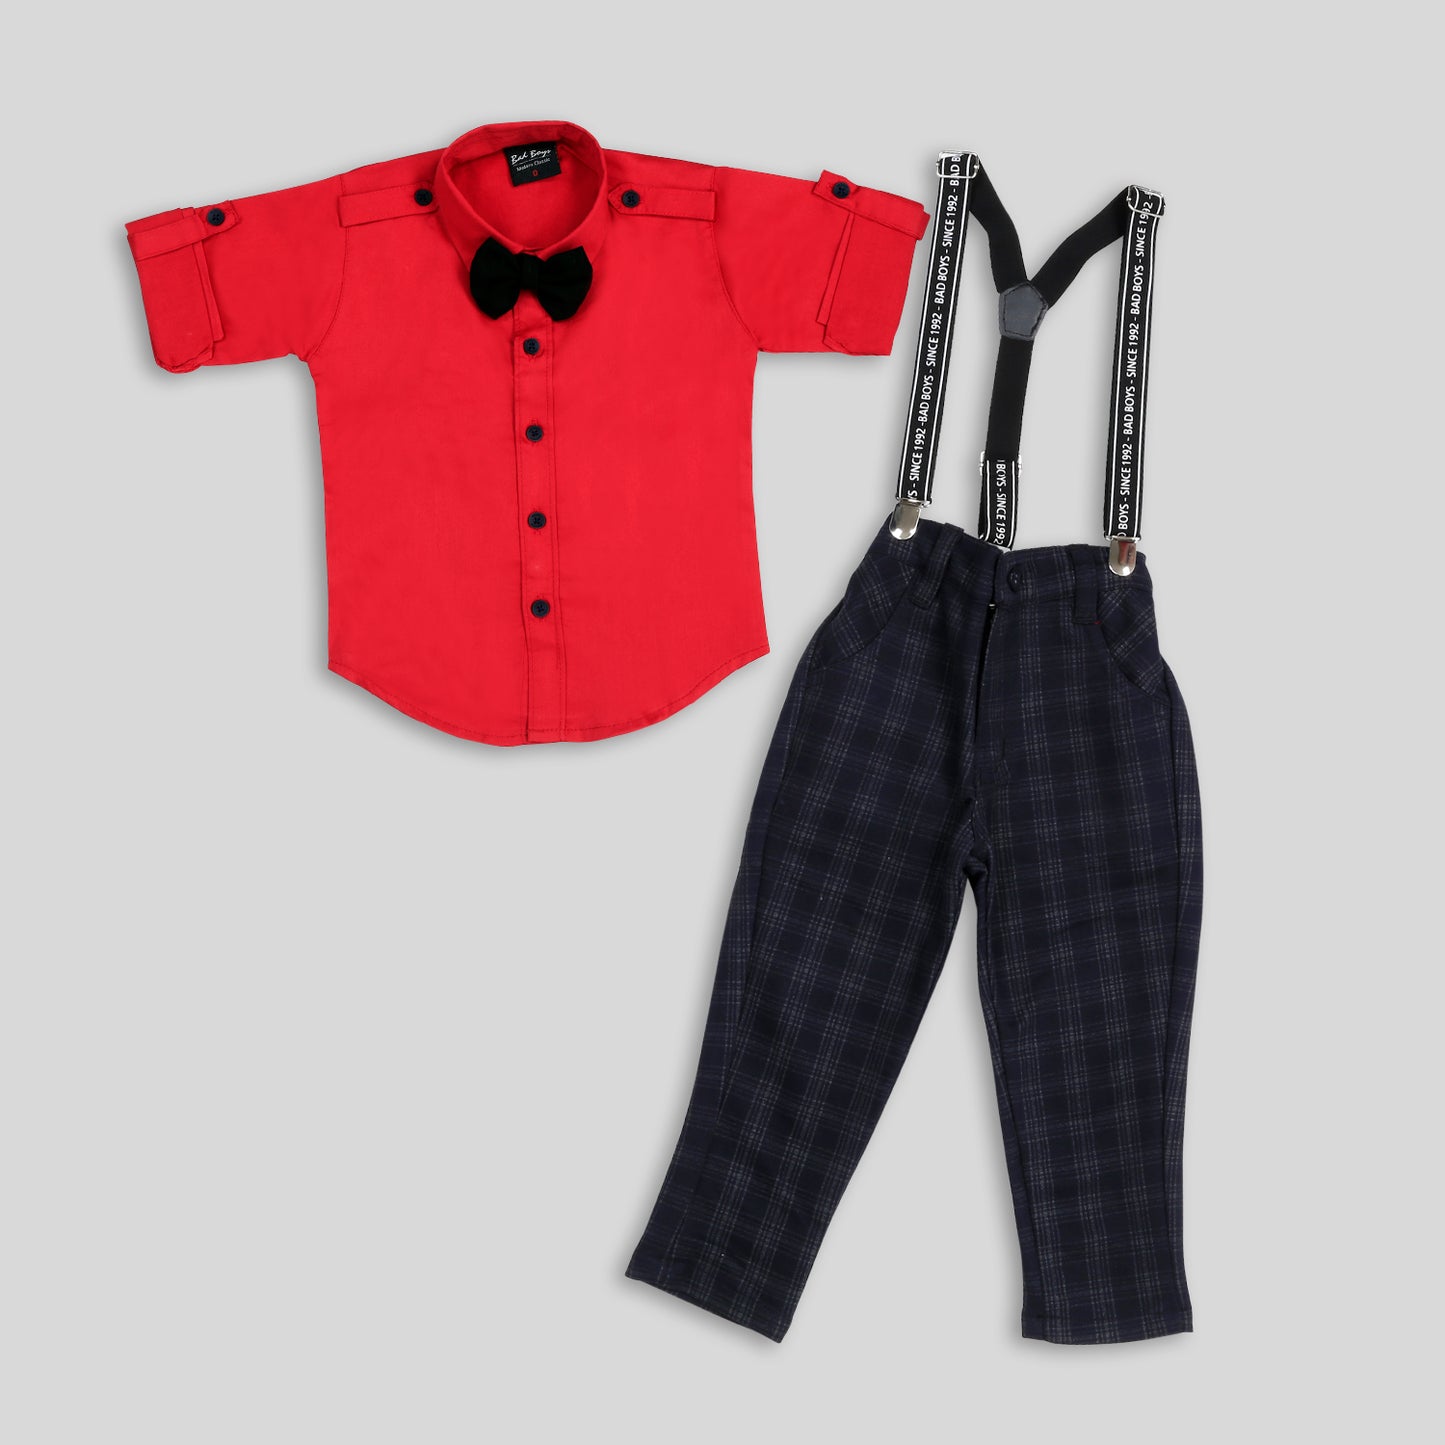 Bad Boys Plaid Party Wear Outfit with Suspenders and a Bow tie.